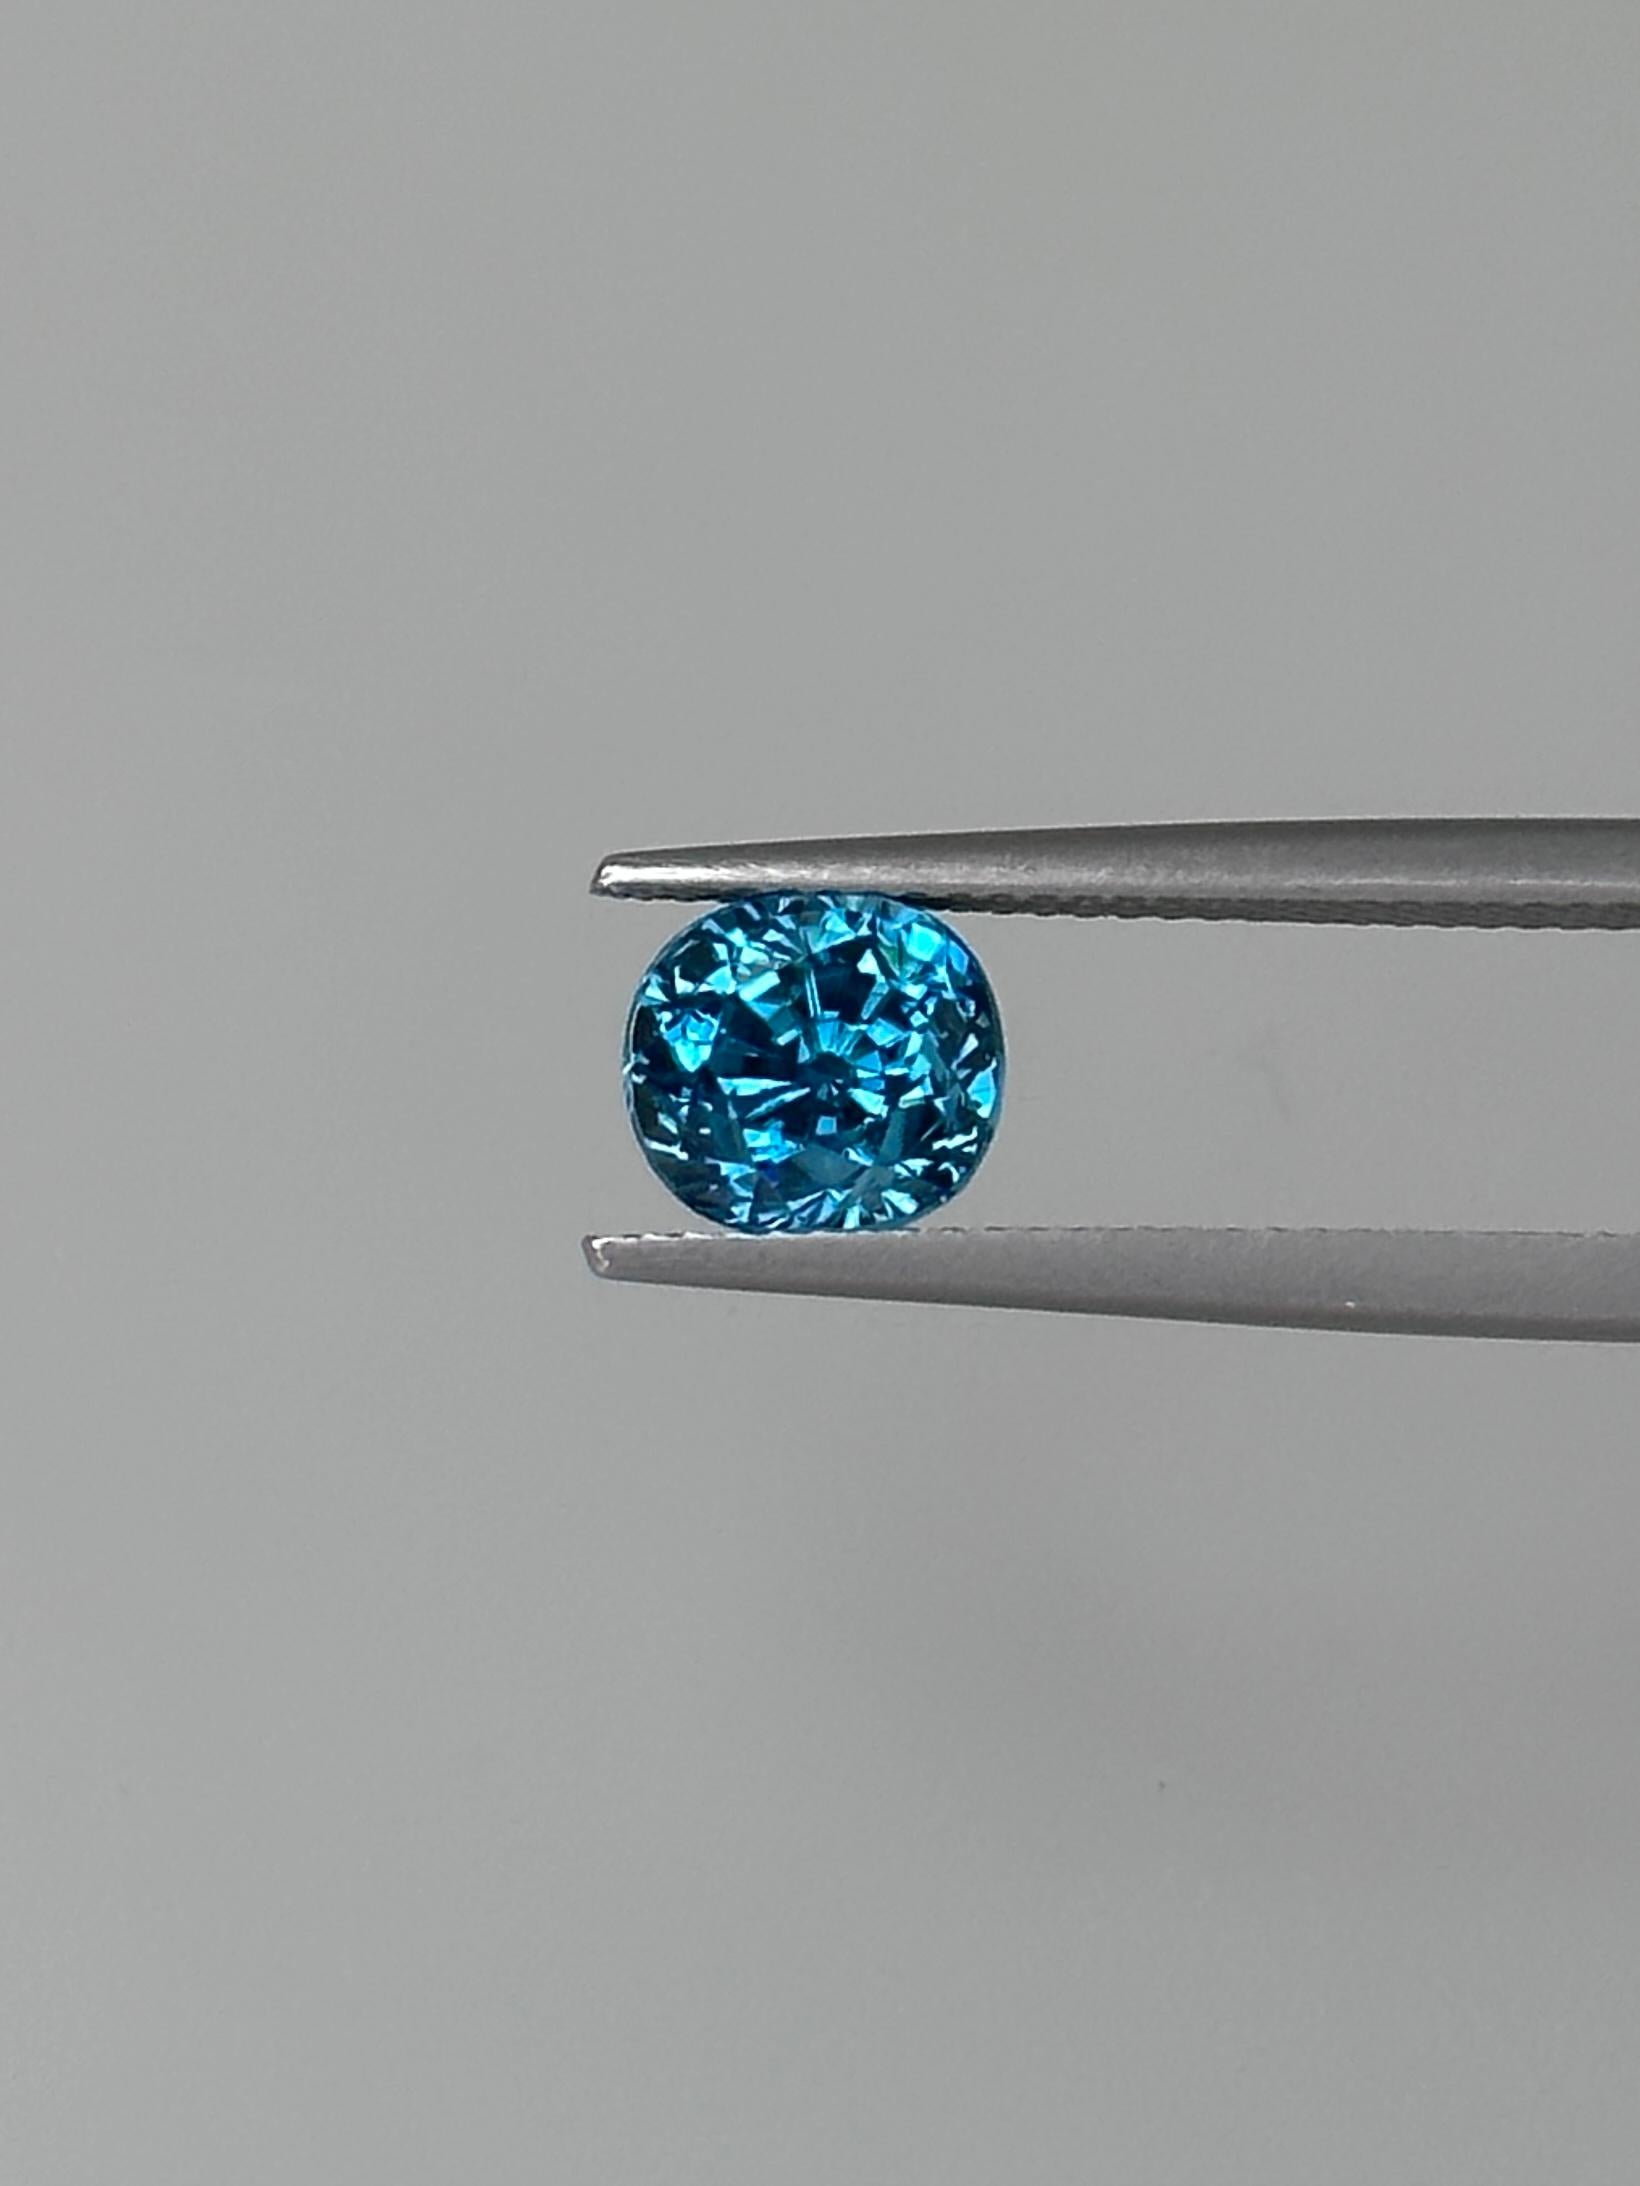 Top quality Ocean Blue Zircon

This 3.84 carat Blue Zircon has an impressive fire and a vivid pure blue color. Giving it the 